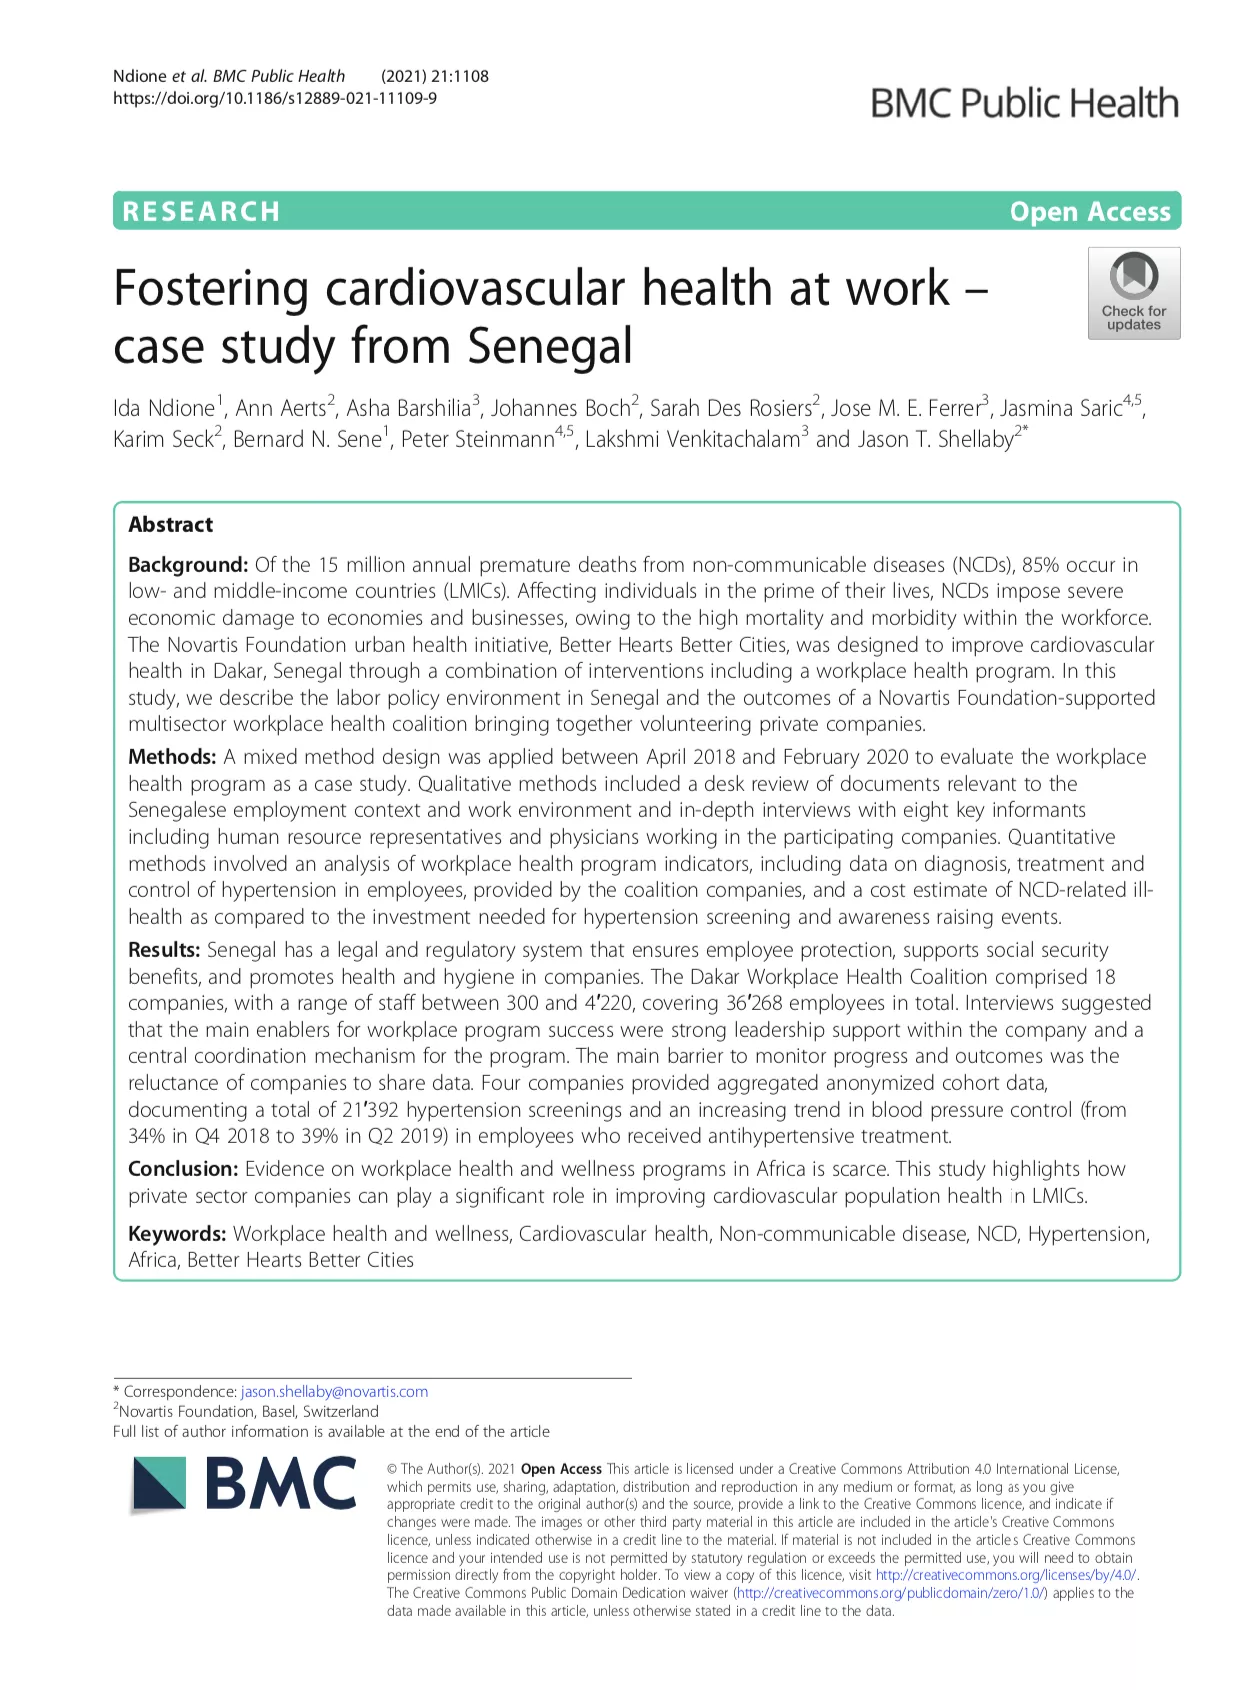 Fostering cardiovascular health at work